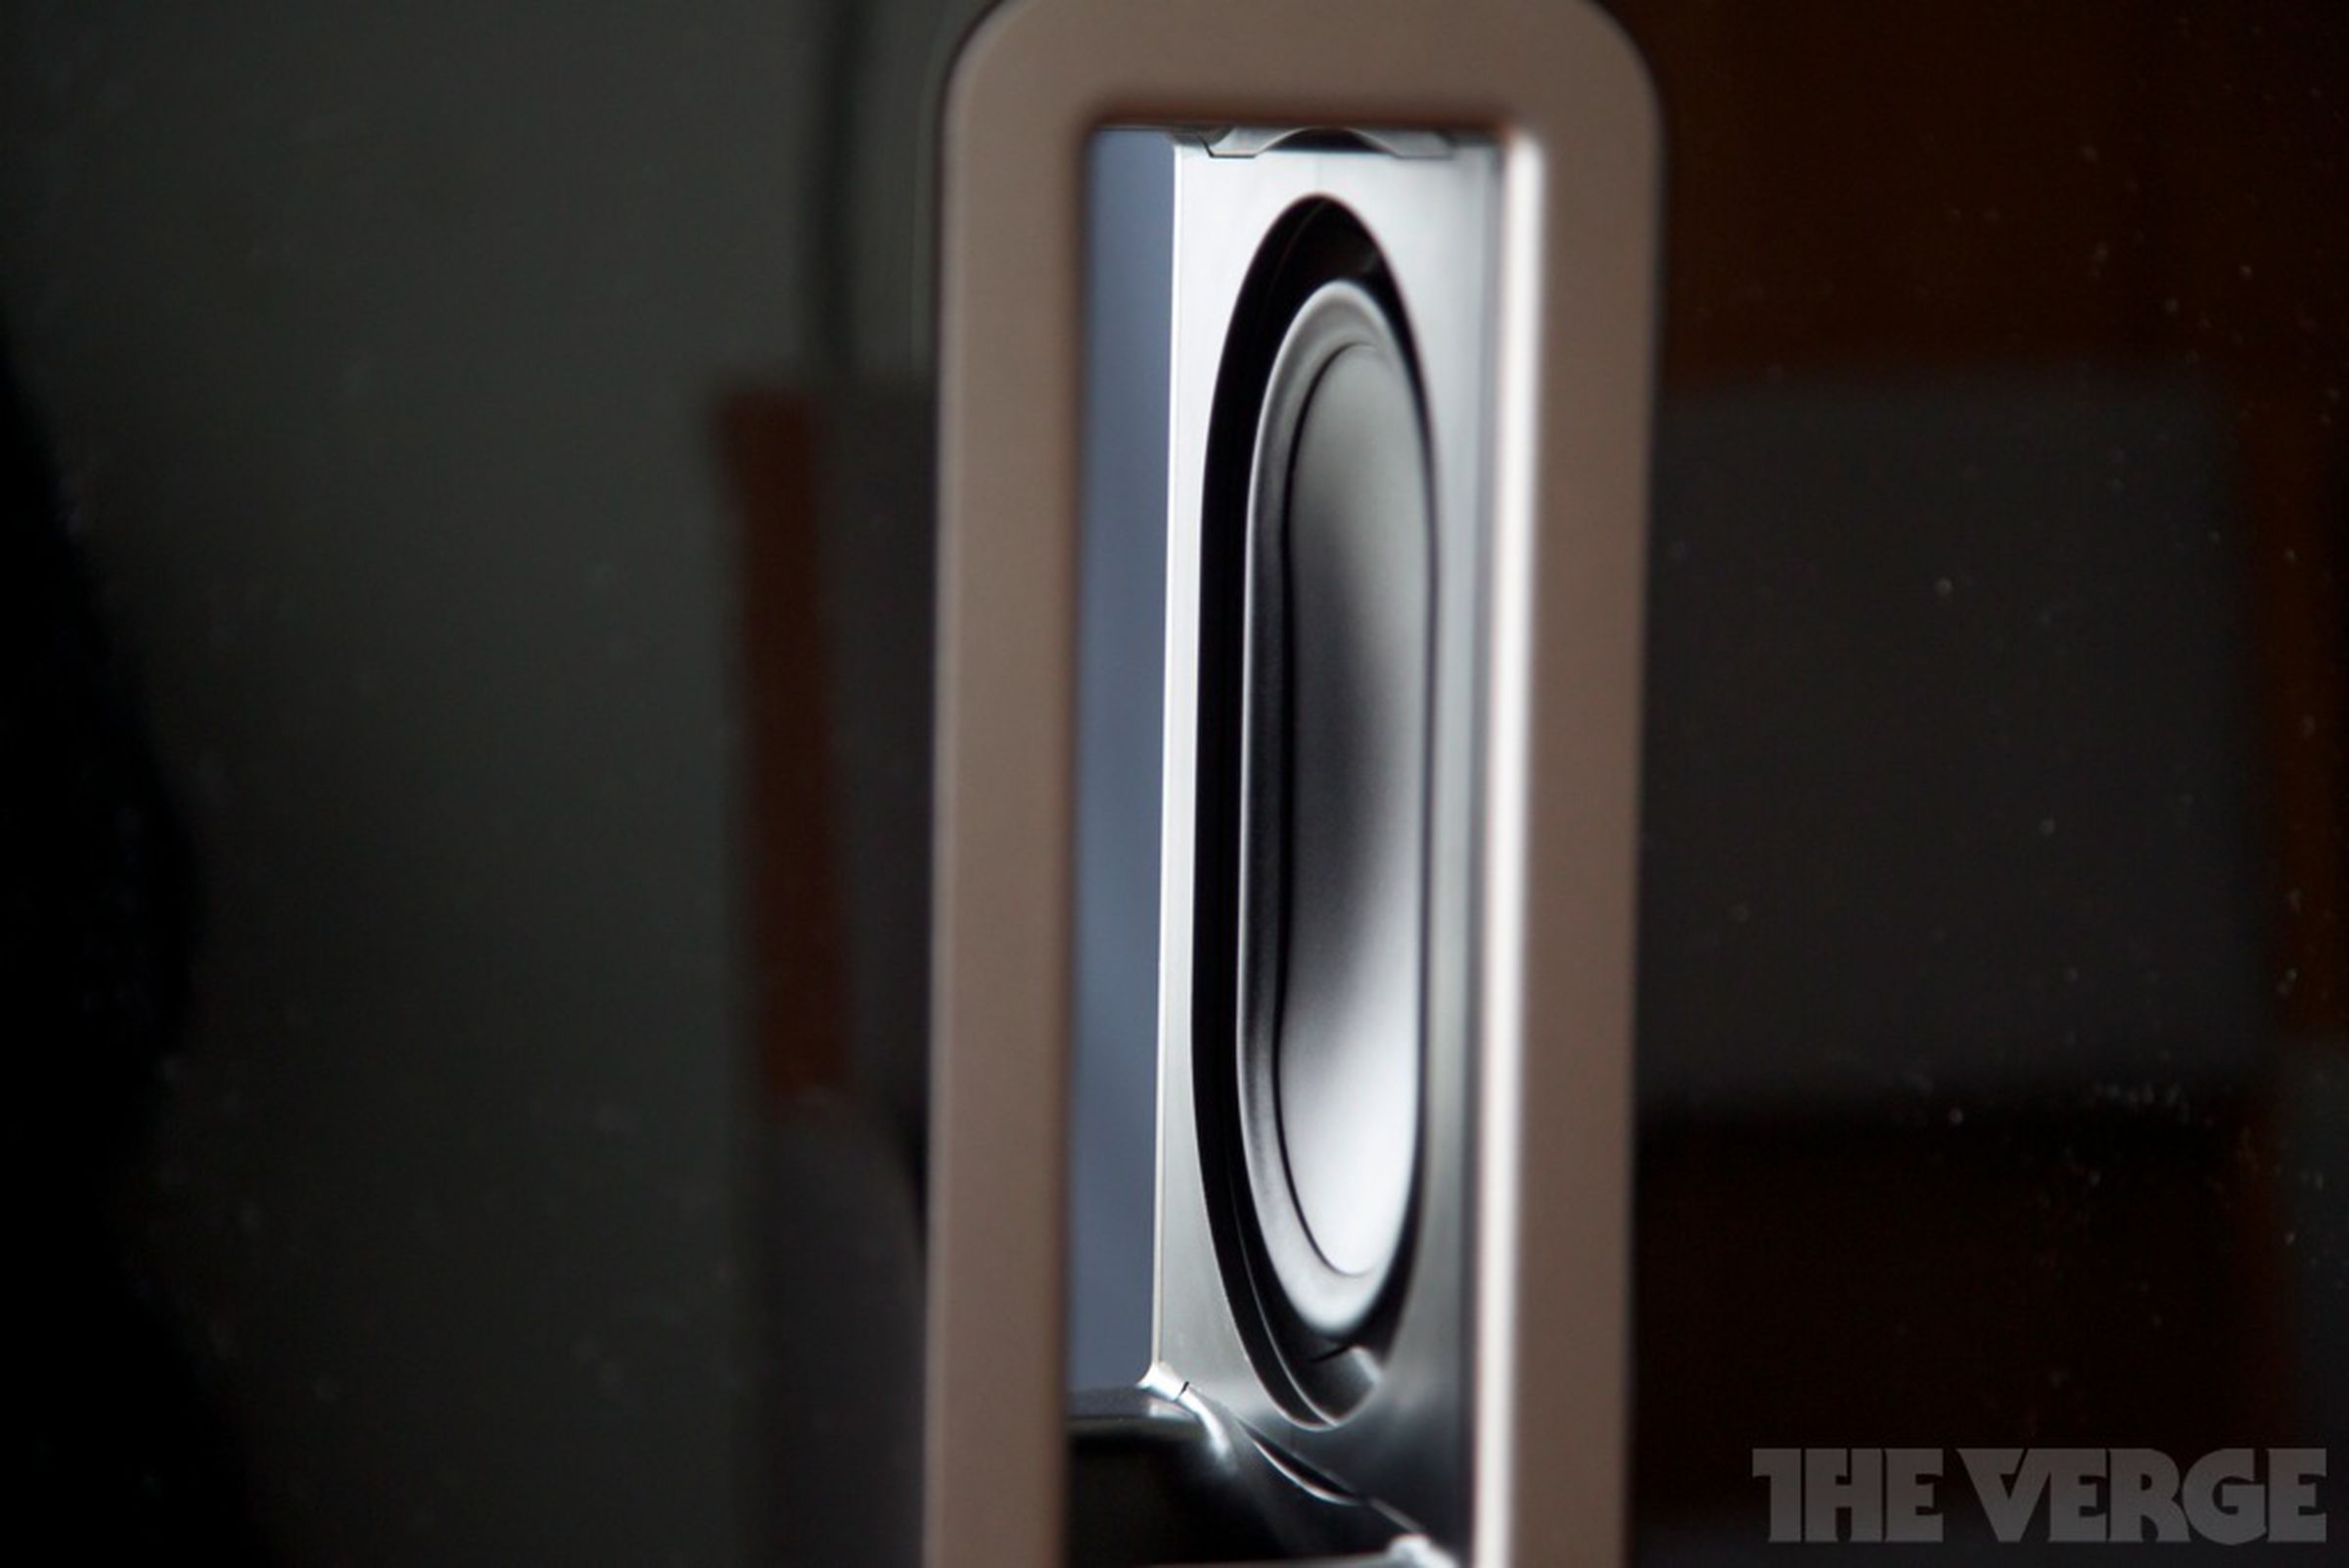 Sonos SUB subwoofer hands-on pictures